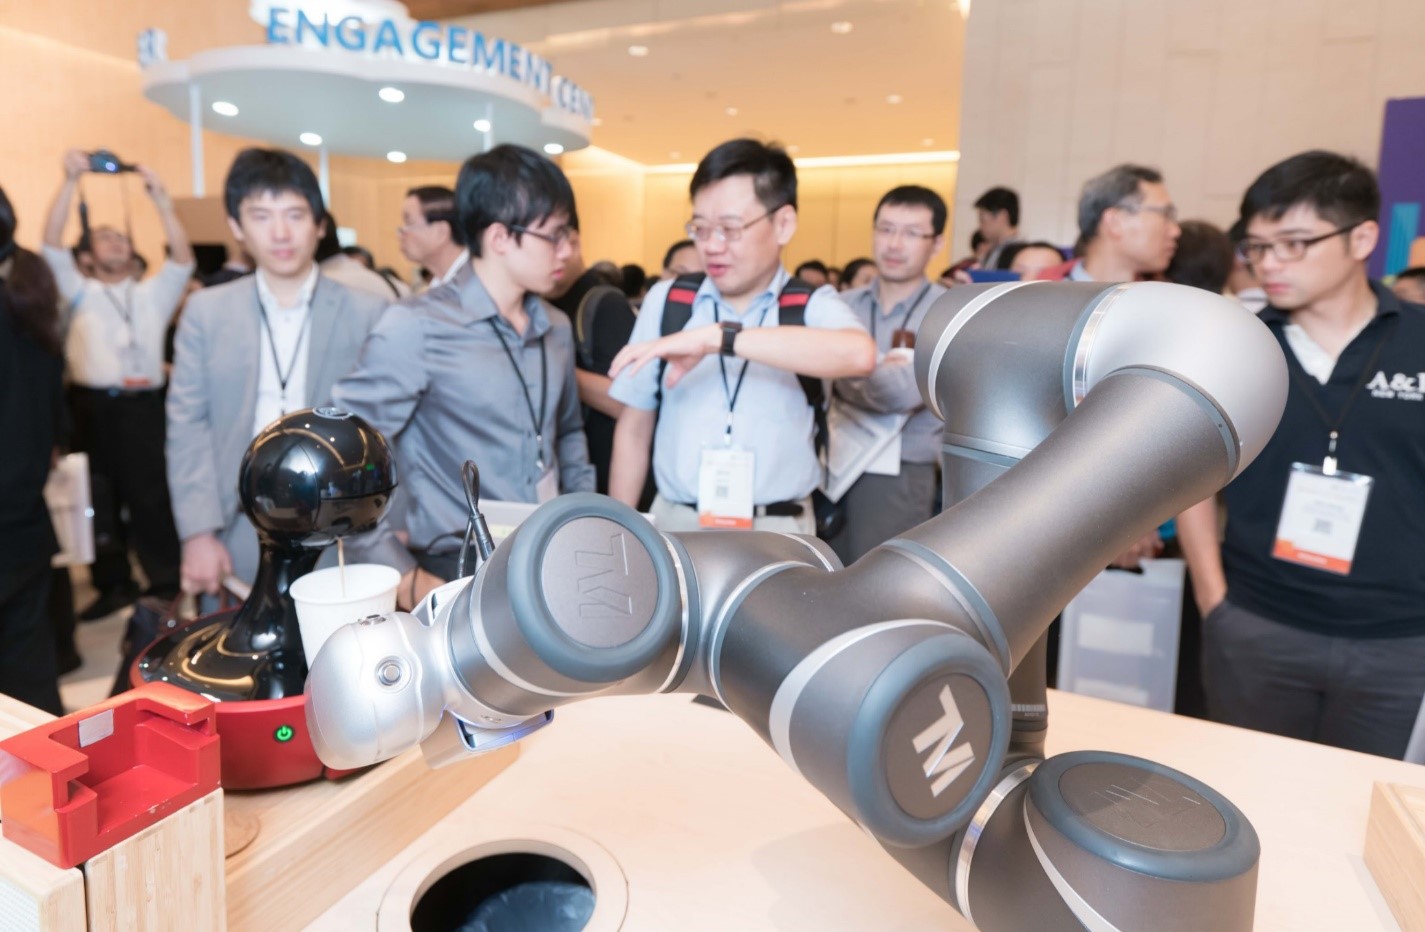 Techman Robot Inc’s coffee-making robot that could be operated by visitors tapping their badges was a hit especially amongst coffee lovers